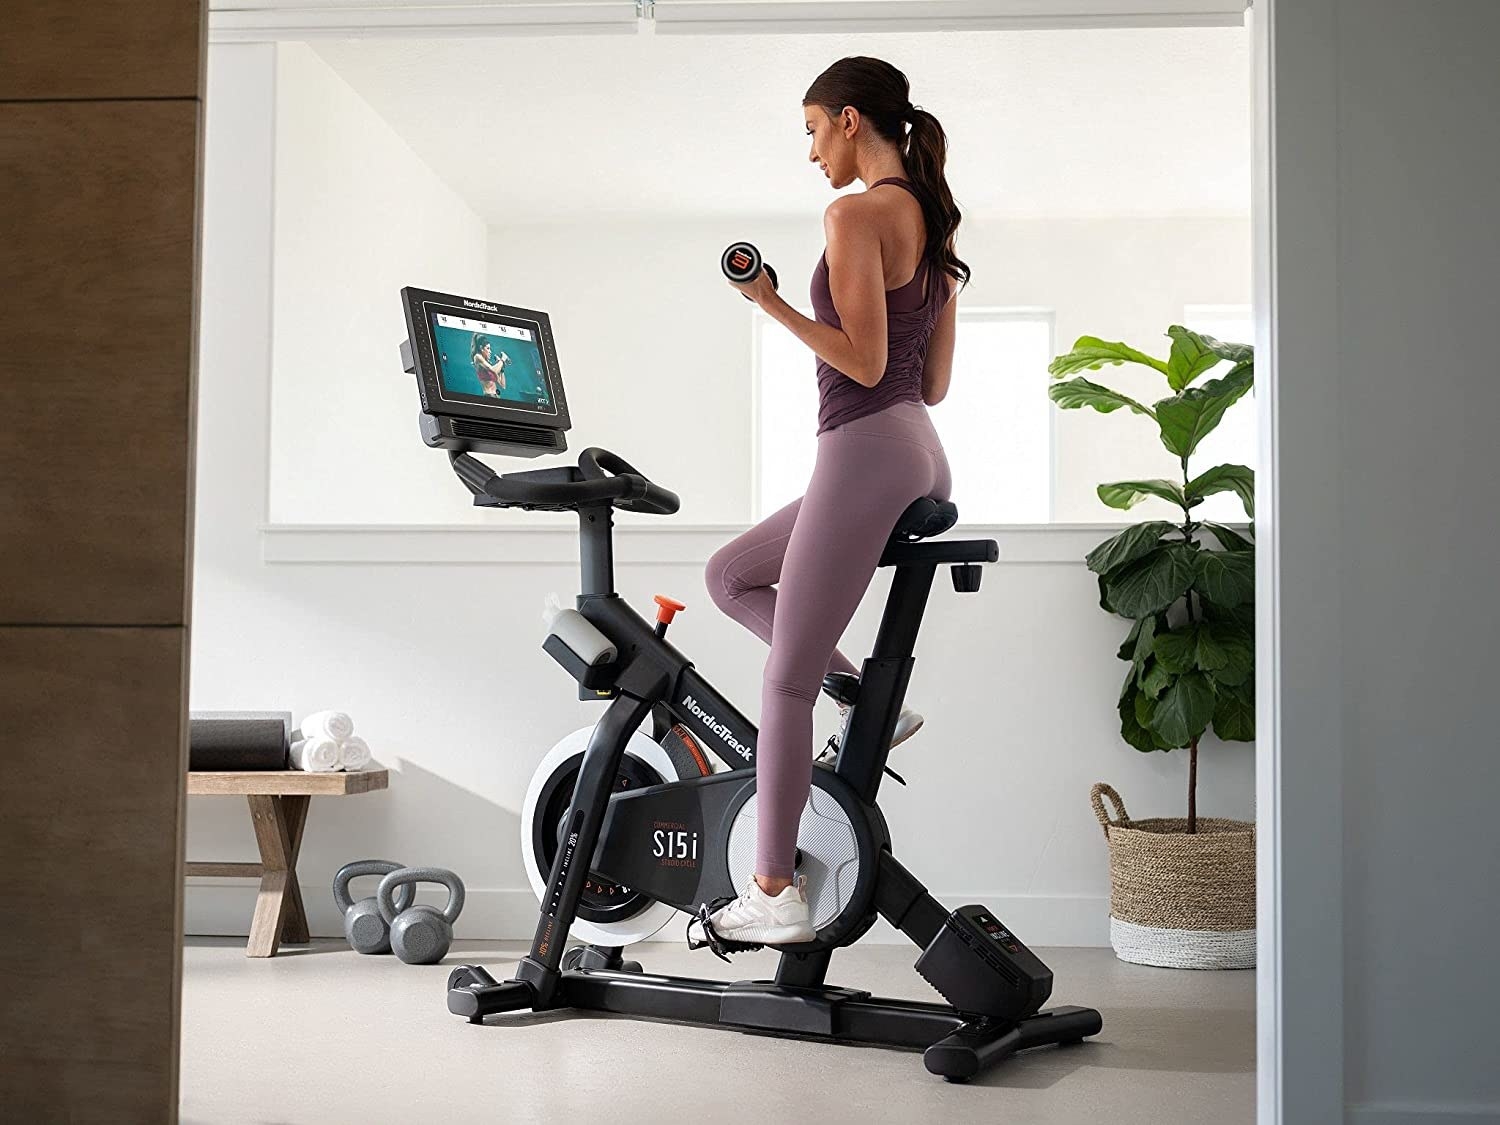 A person doing a class on the bike in their home gym